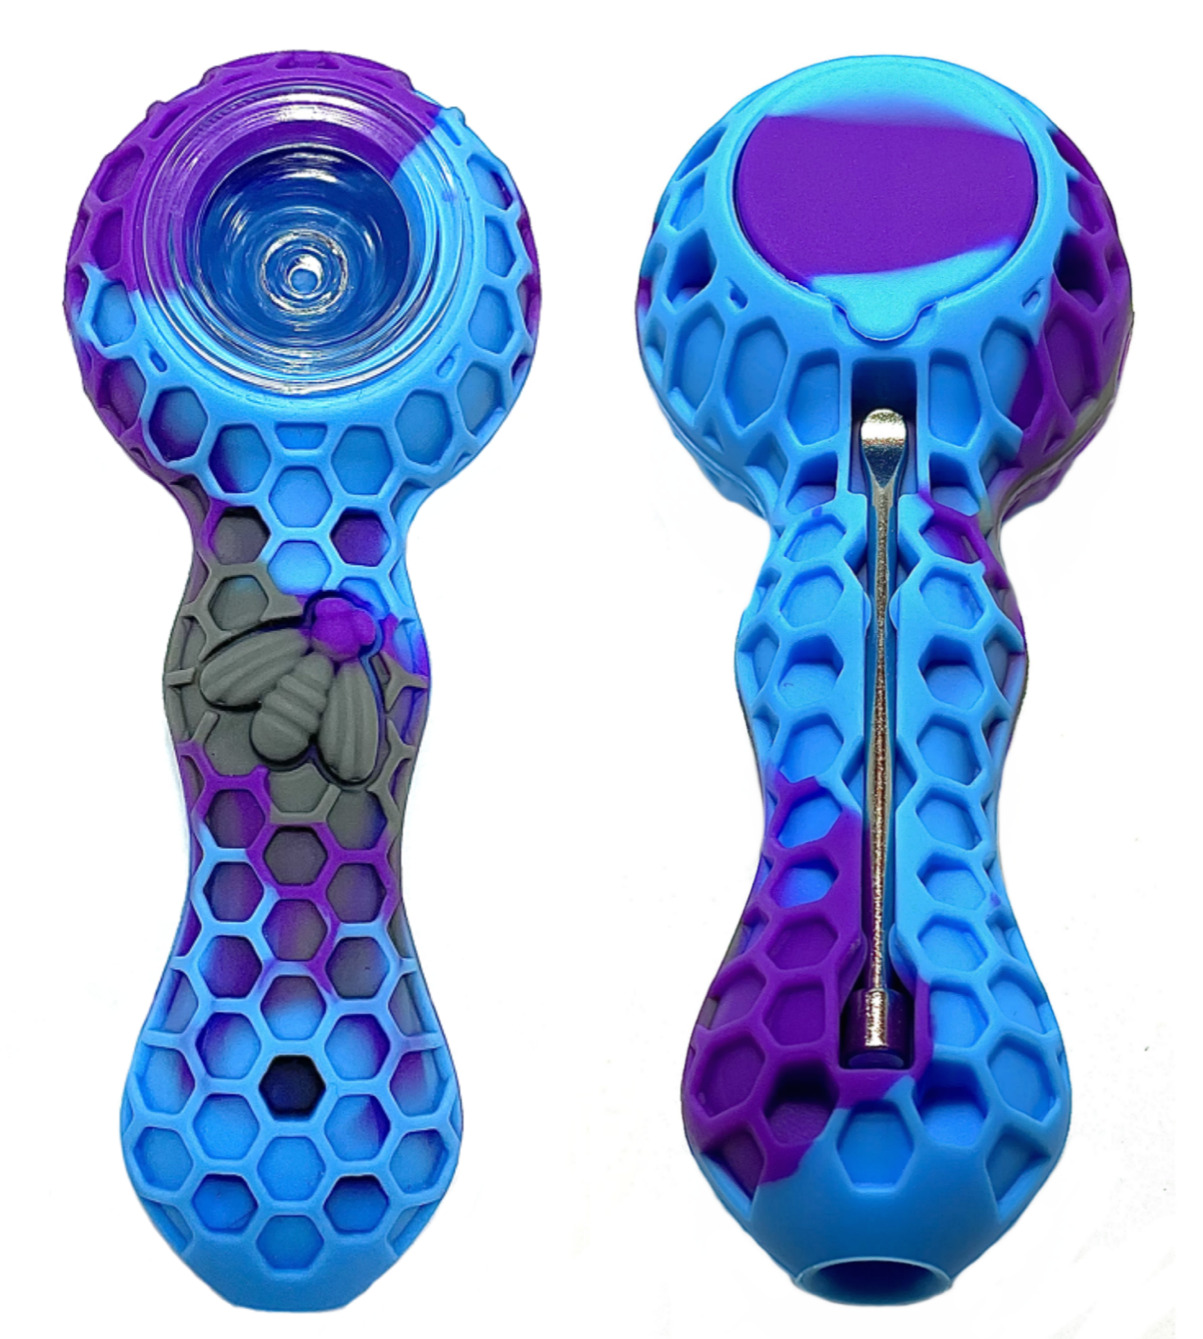 Silicone Tobacco Smoking Pipe with Glass Bowl - (Purple/Blue) - USA SELLER